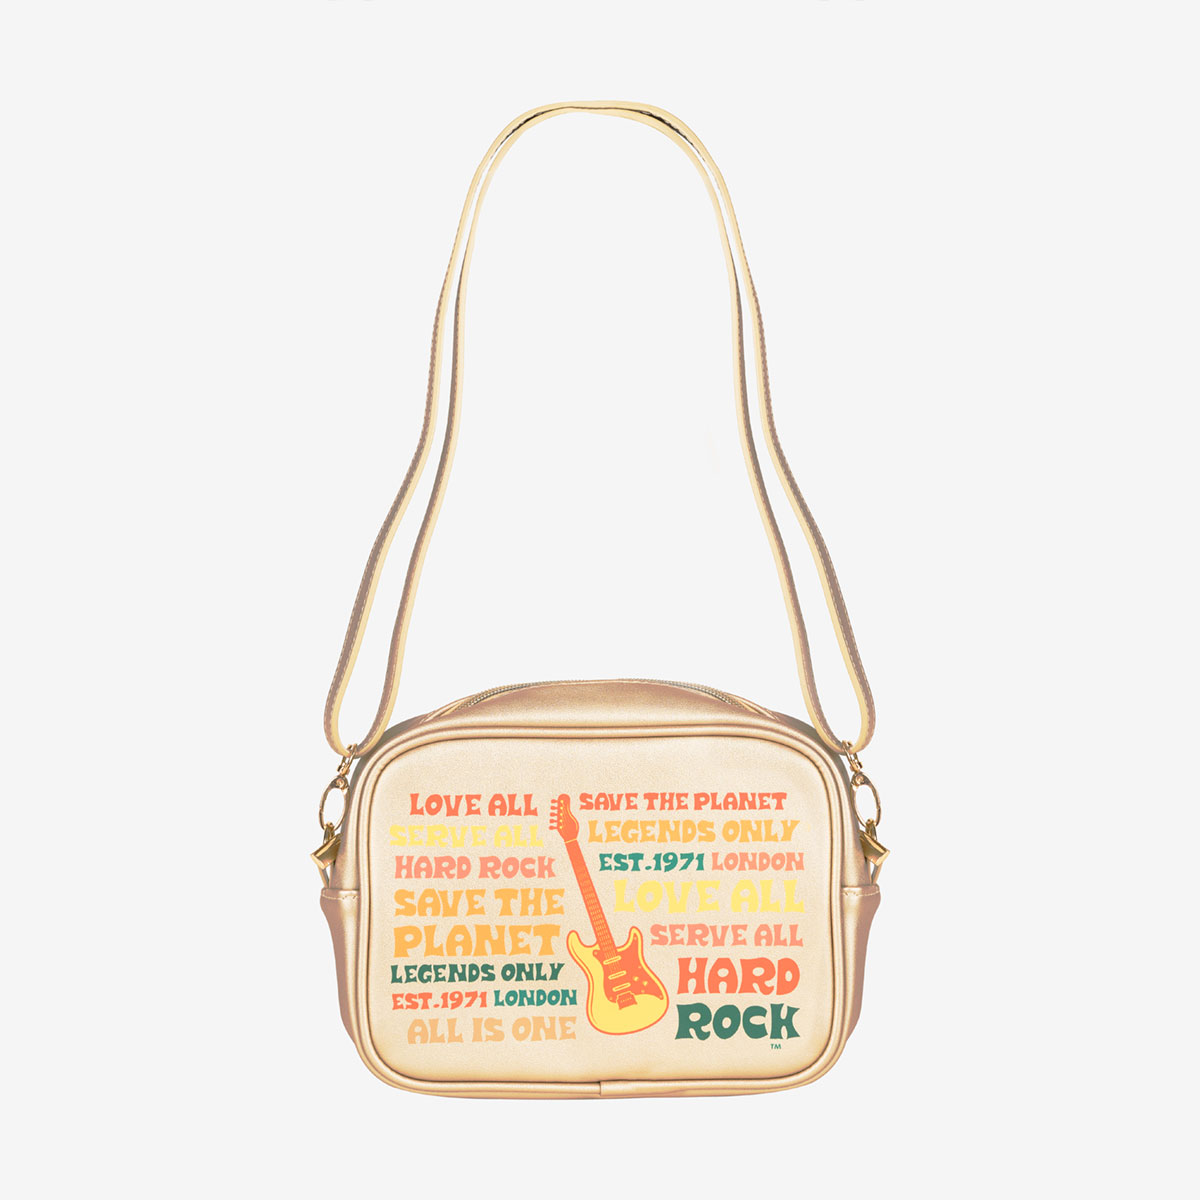 Gold Hard Rock Music Festival Crossbody Bag with Mottos image number 6